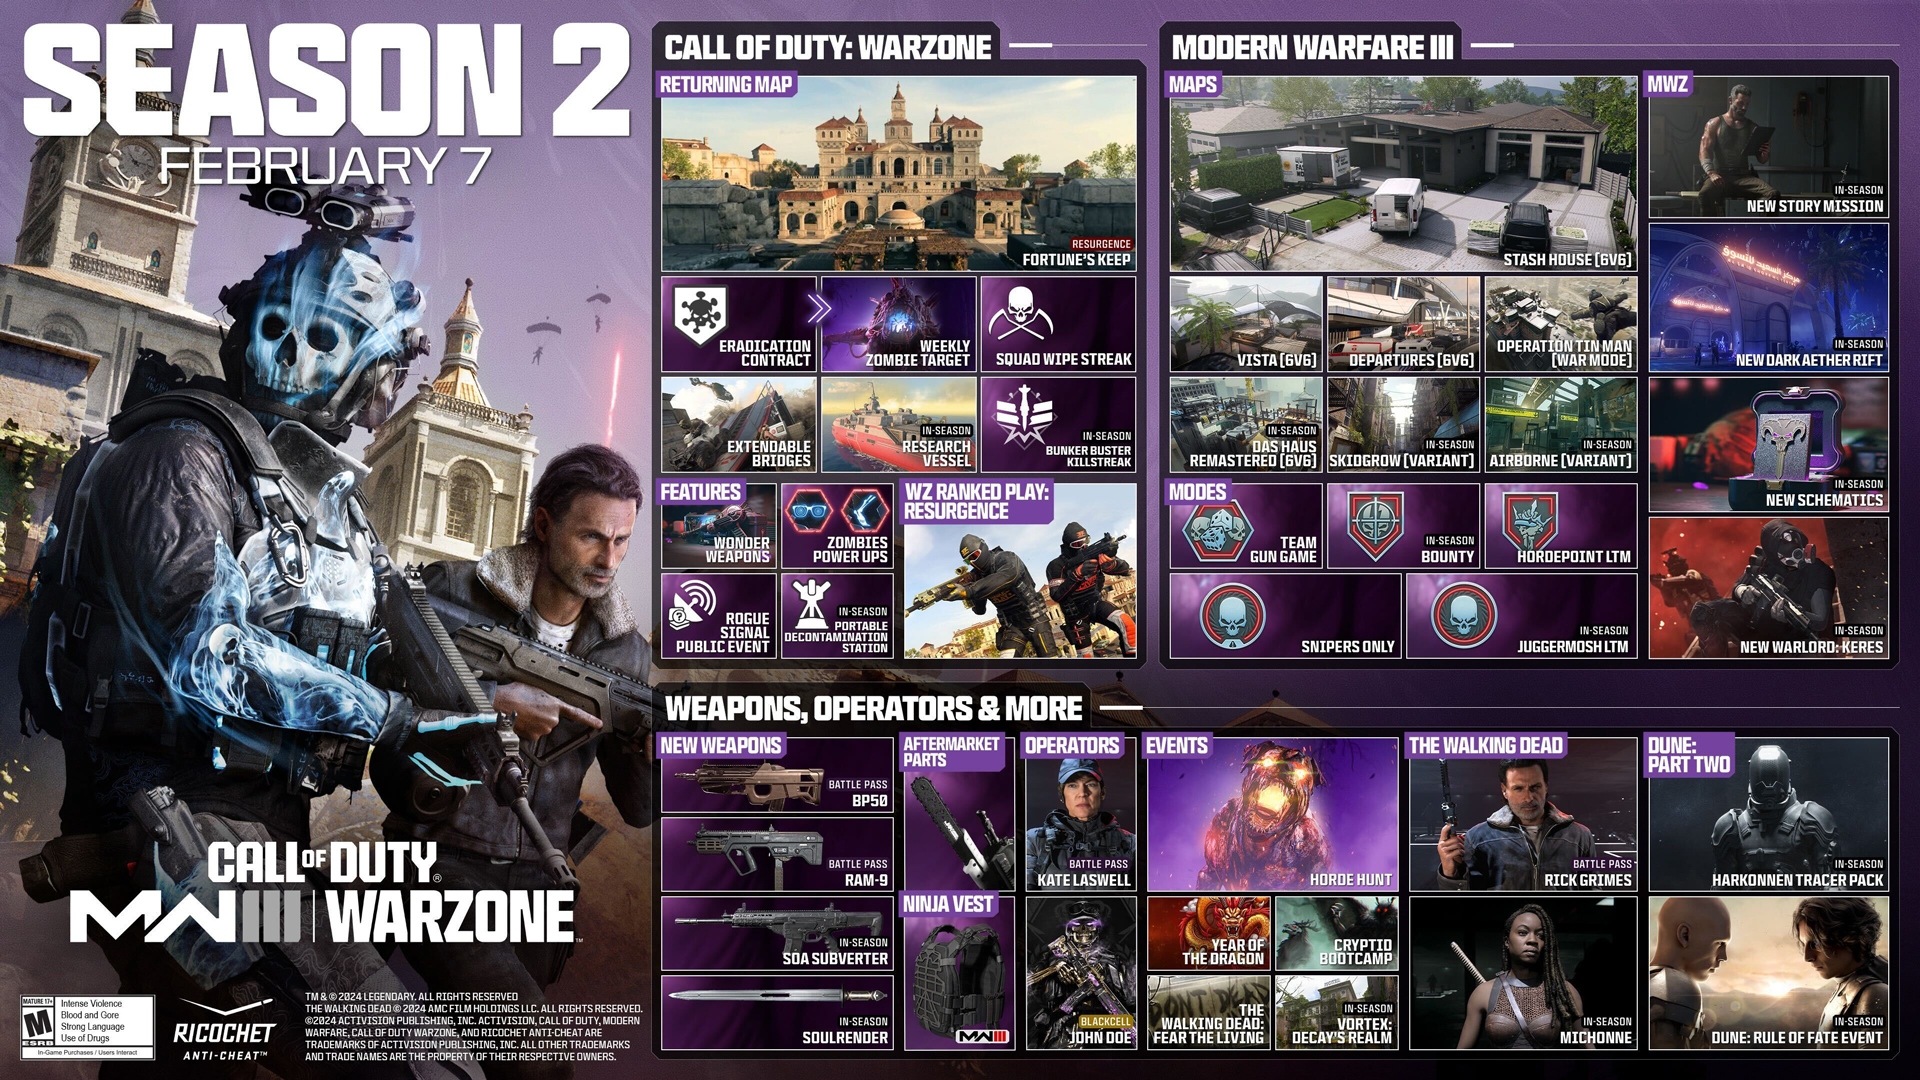 The Wait is Over: Modern Warfare III and Call of Duty: Warzone Season 2 Bring Unprecedented Action!